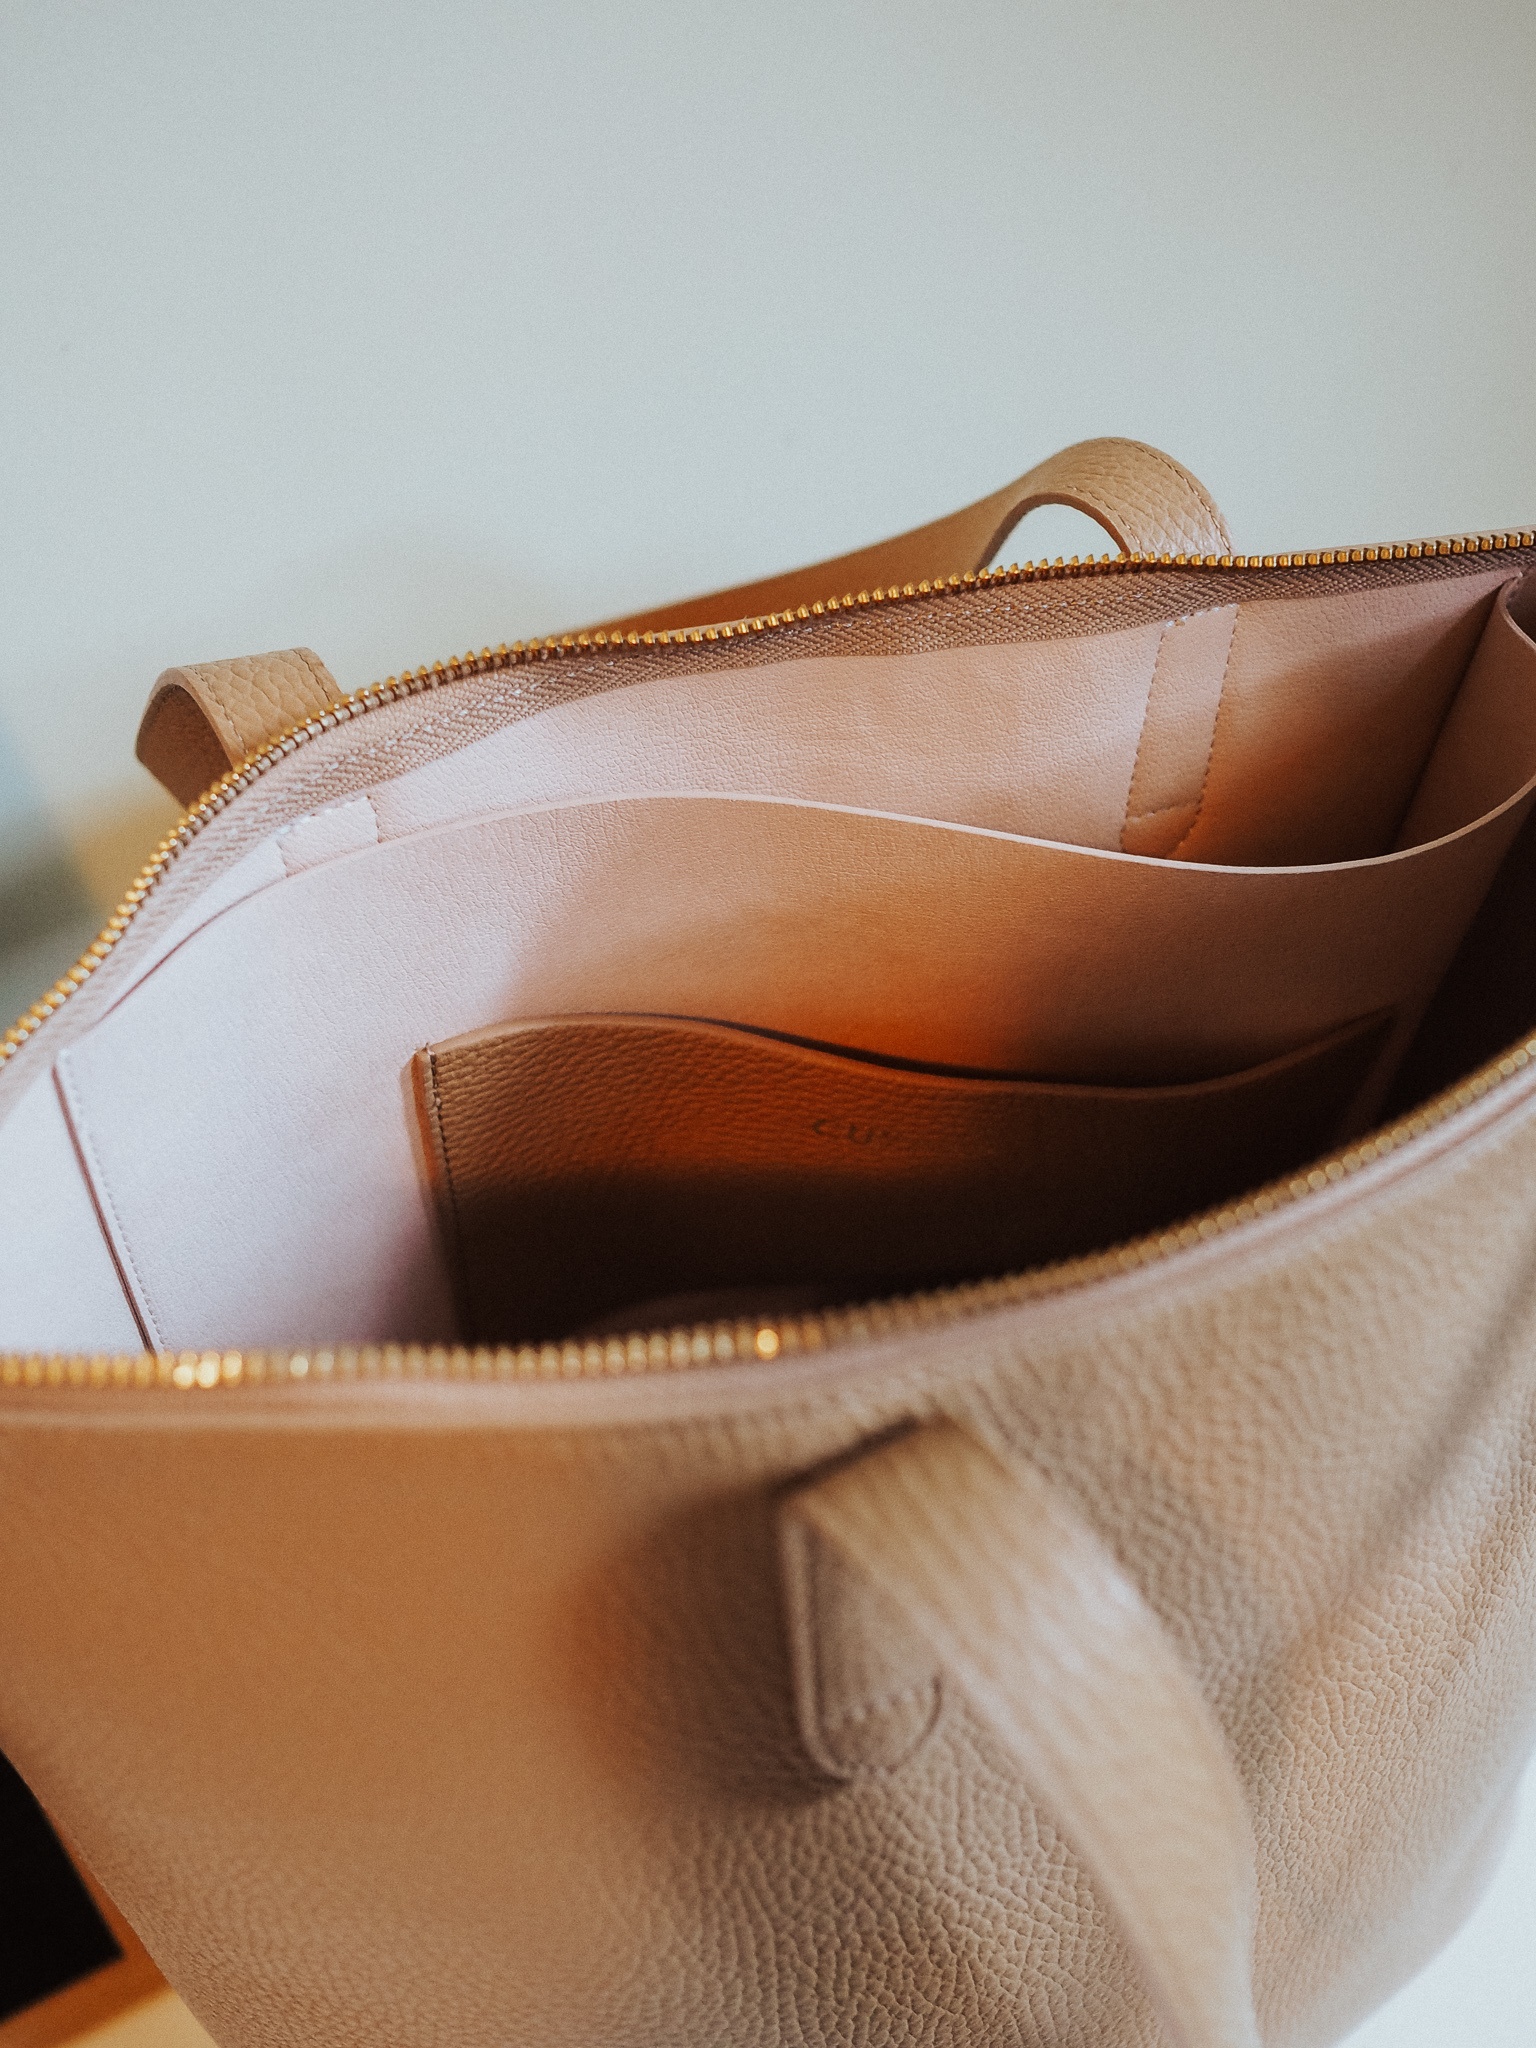 Comparing the Cuyana, Everlane, and Madewell Totes - by Kelsey Boyanzhu